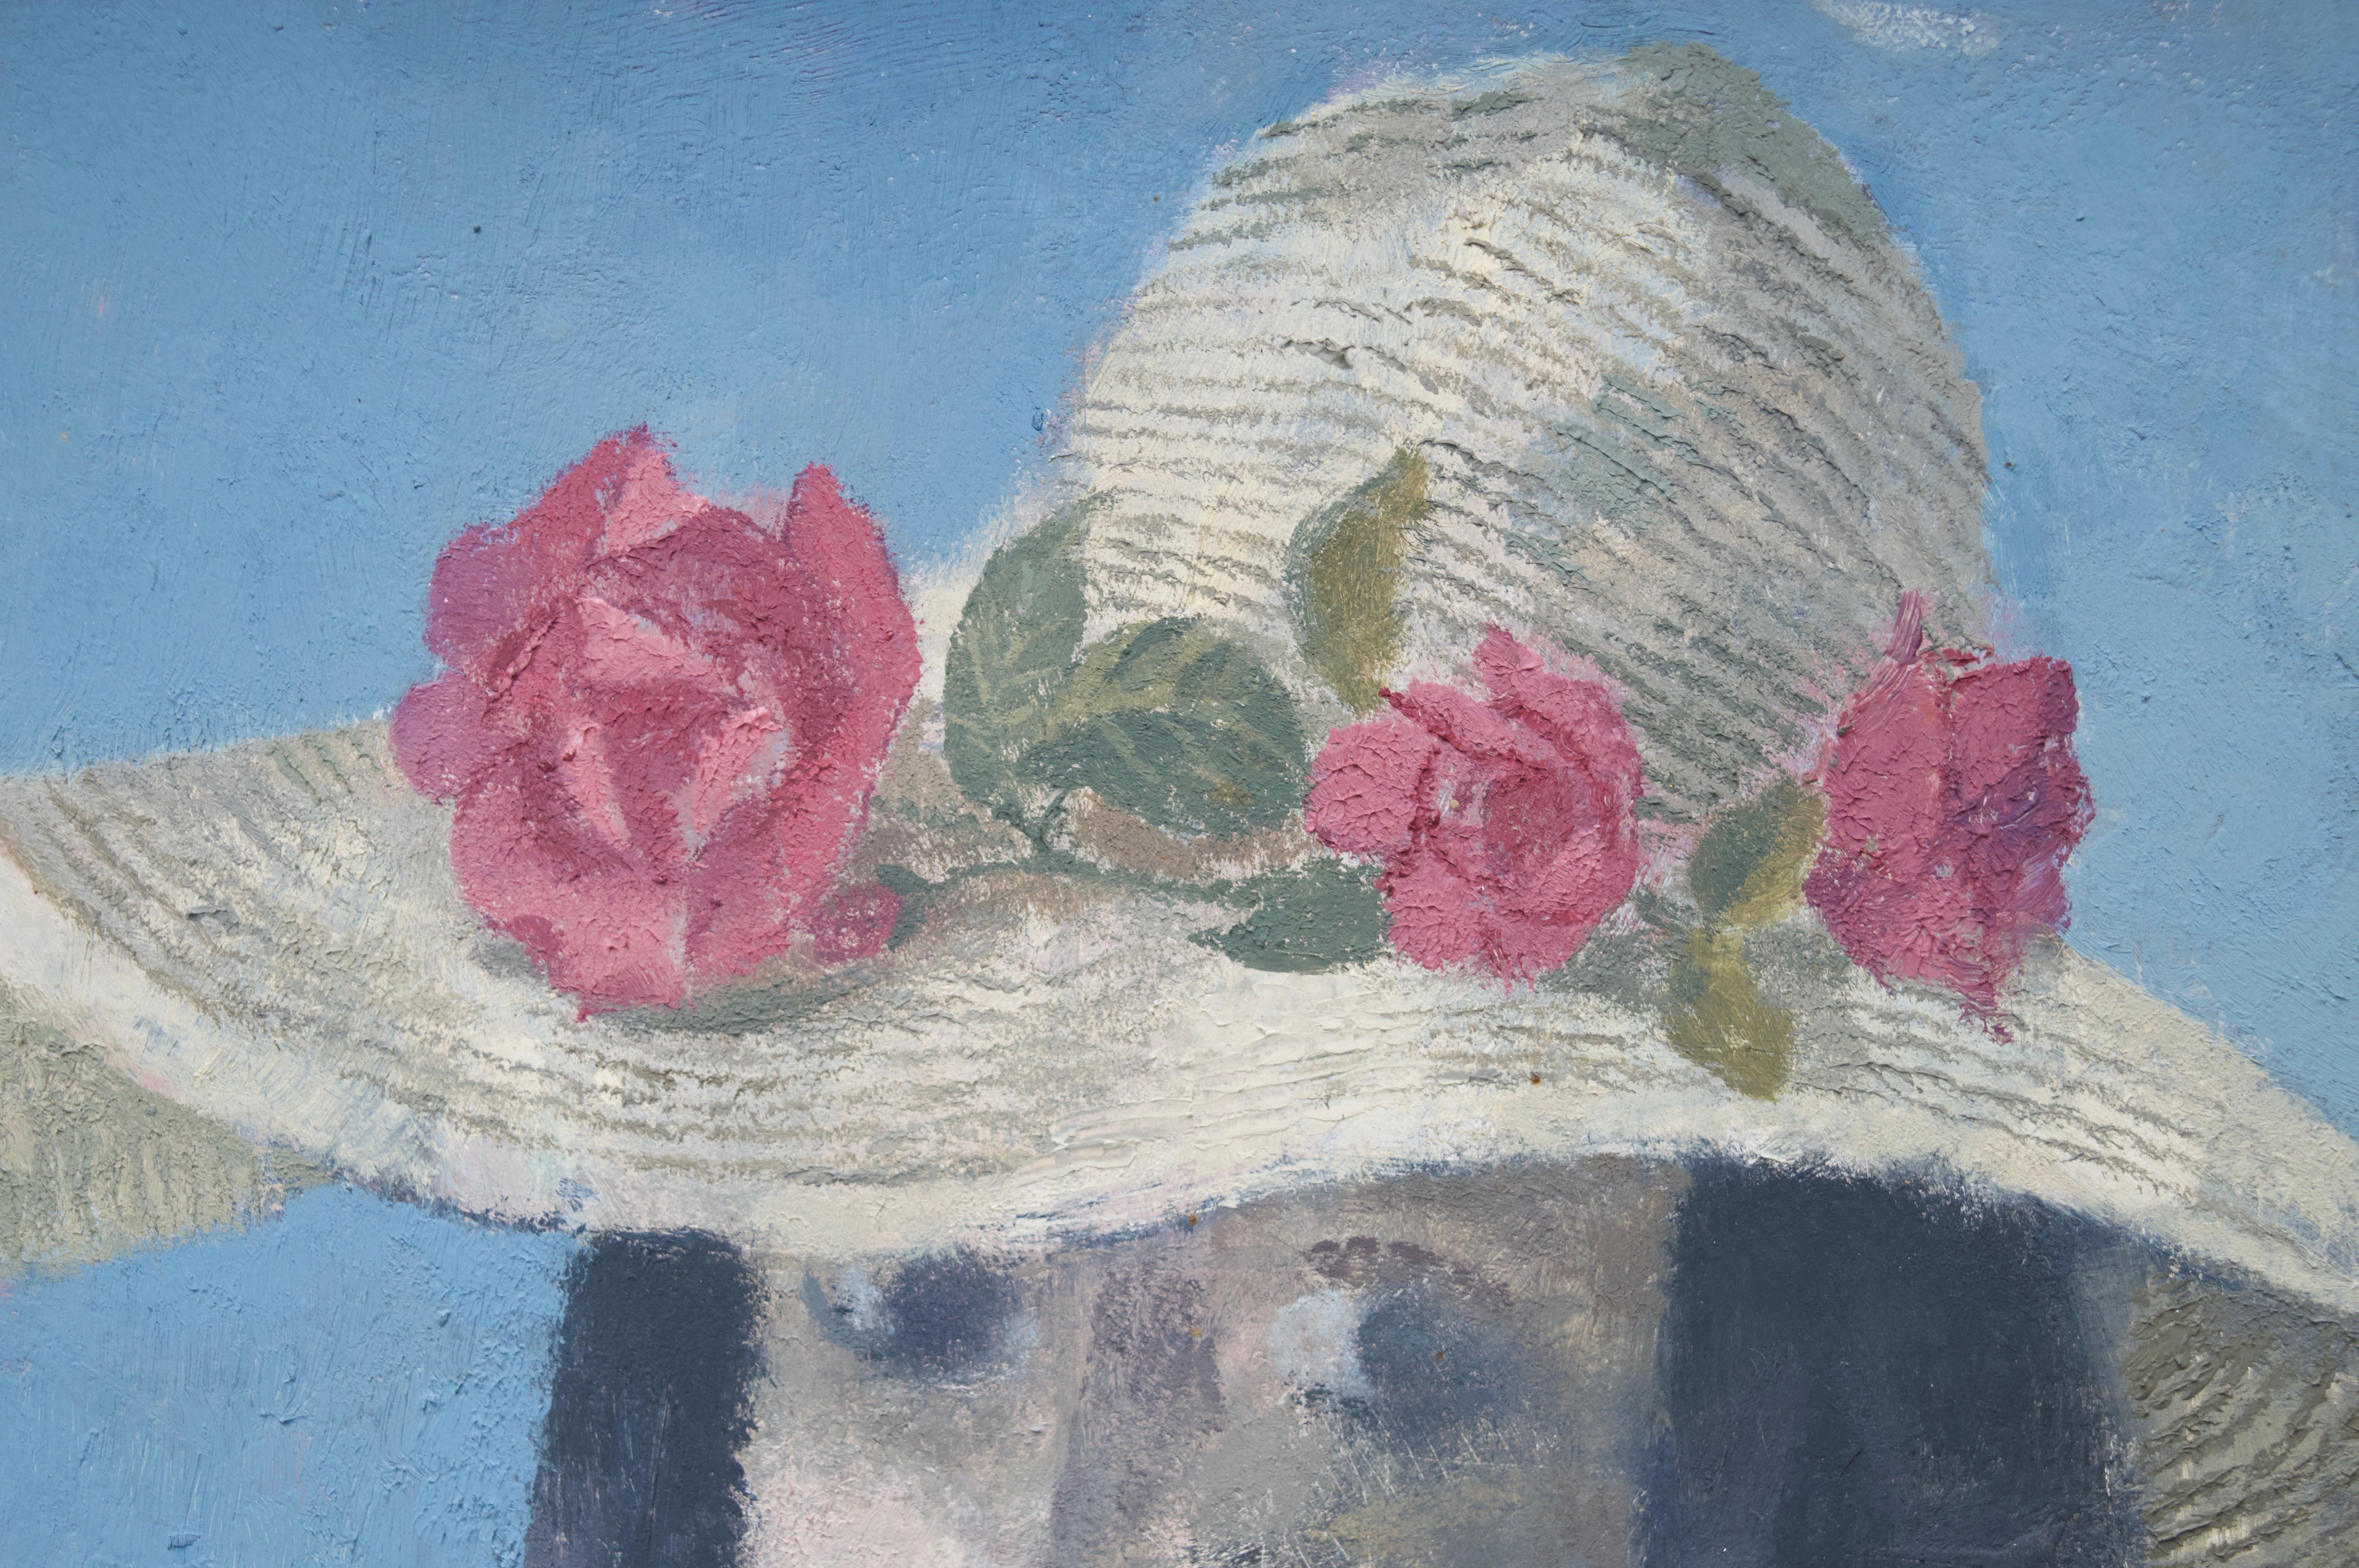 Reginald Brill (1902-1974)
The Sun hat,
Signed,
Oil on board,
9 x 12 inches.
14 x 17 inches with frame
​
Exhibited: The Phoenix Gallery, Lavenham, Suffolk, 1975.
​
Provenance: Private Collection; bought from the above exhibition

This wonderfully